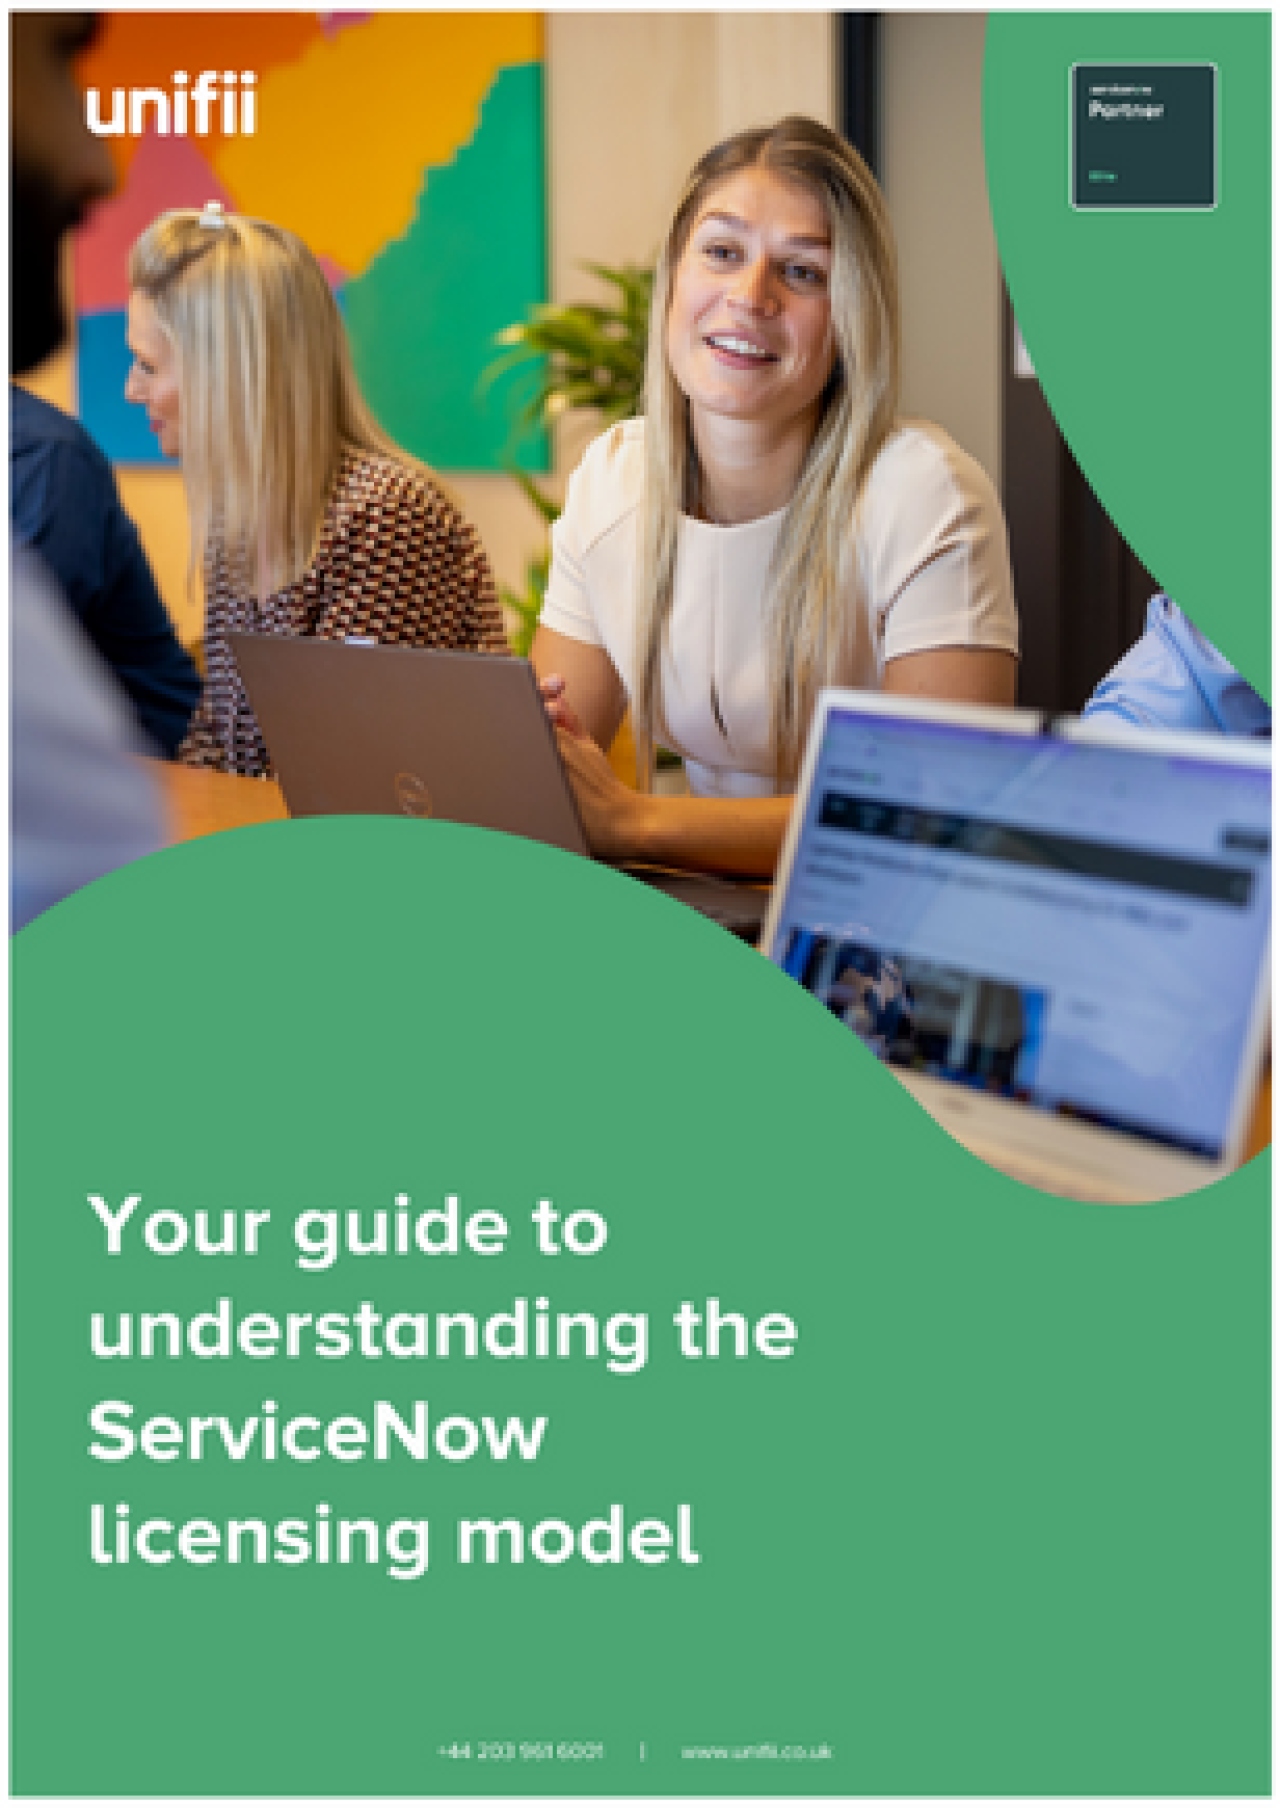 Your guide to understanding the ServiceNow licensing model.